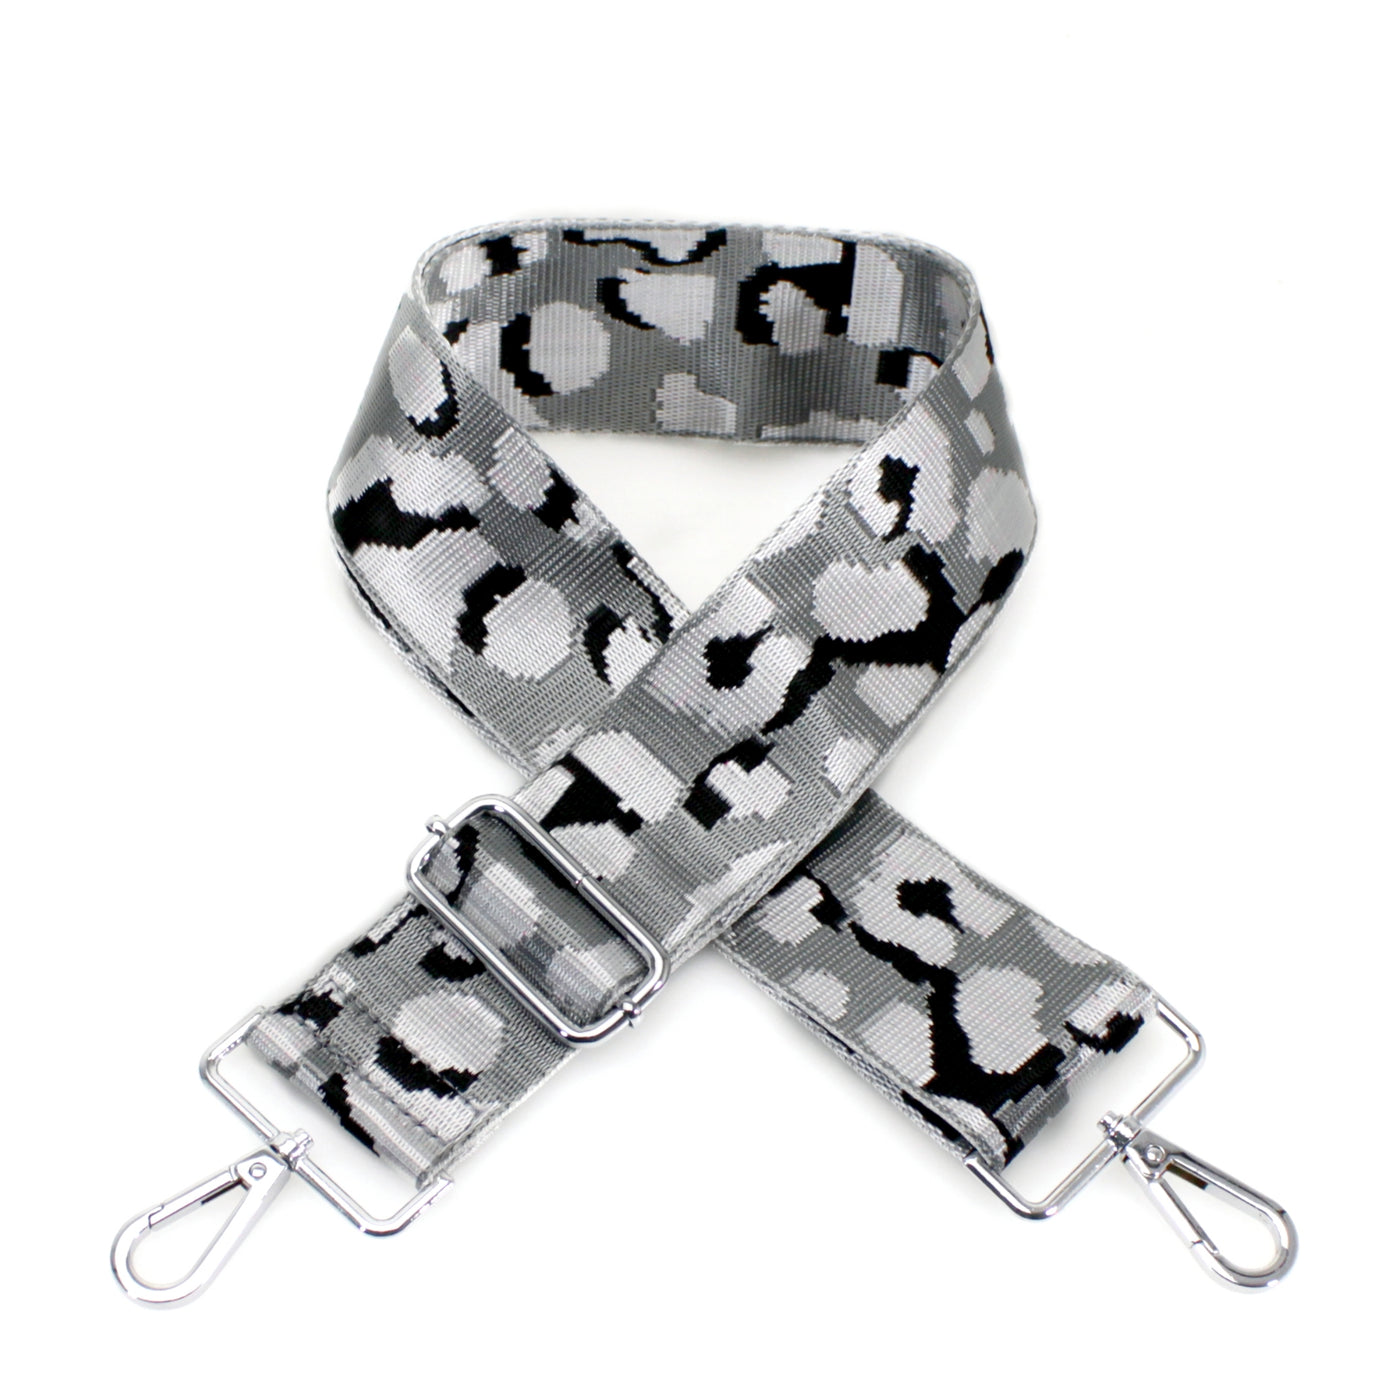 Silver Cheetah Print Bag Strap - with Silver Fittings